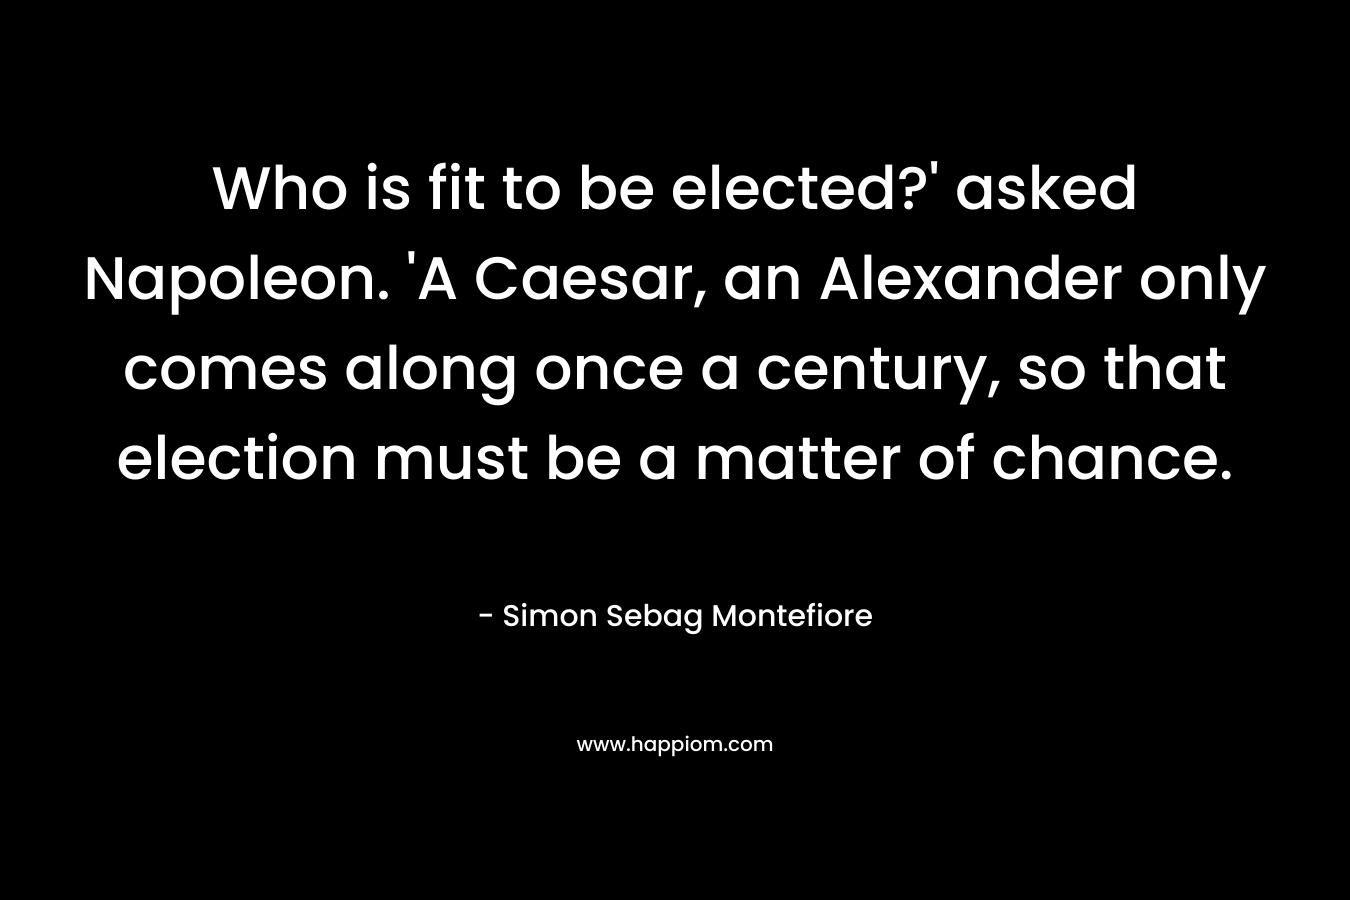 Who is fit to be elected?' asked Napoleon. 'A Caesar, an Alexander only comes along once a century, so that election must be a matter of chance.